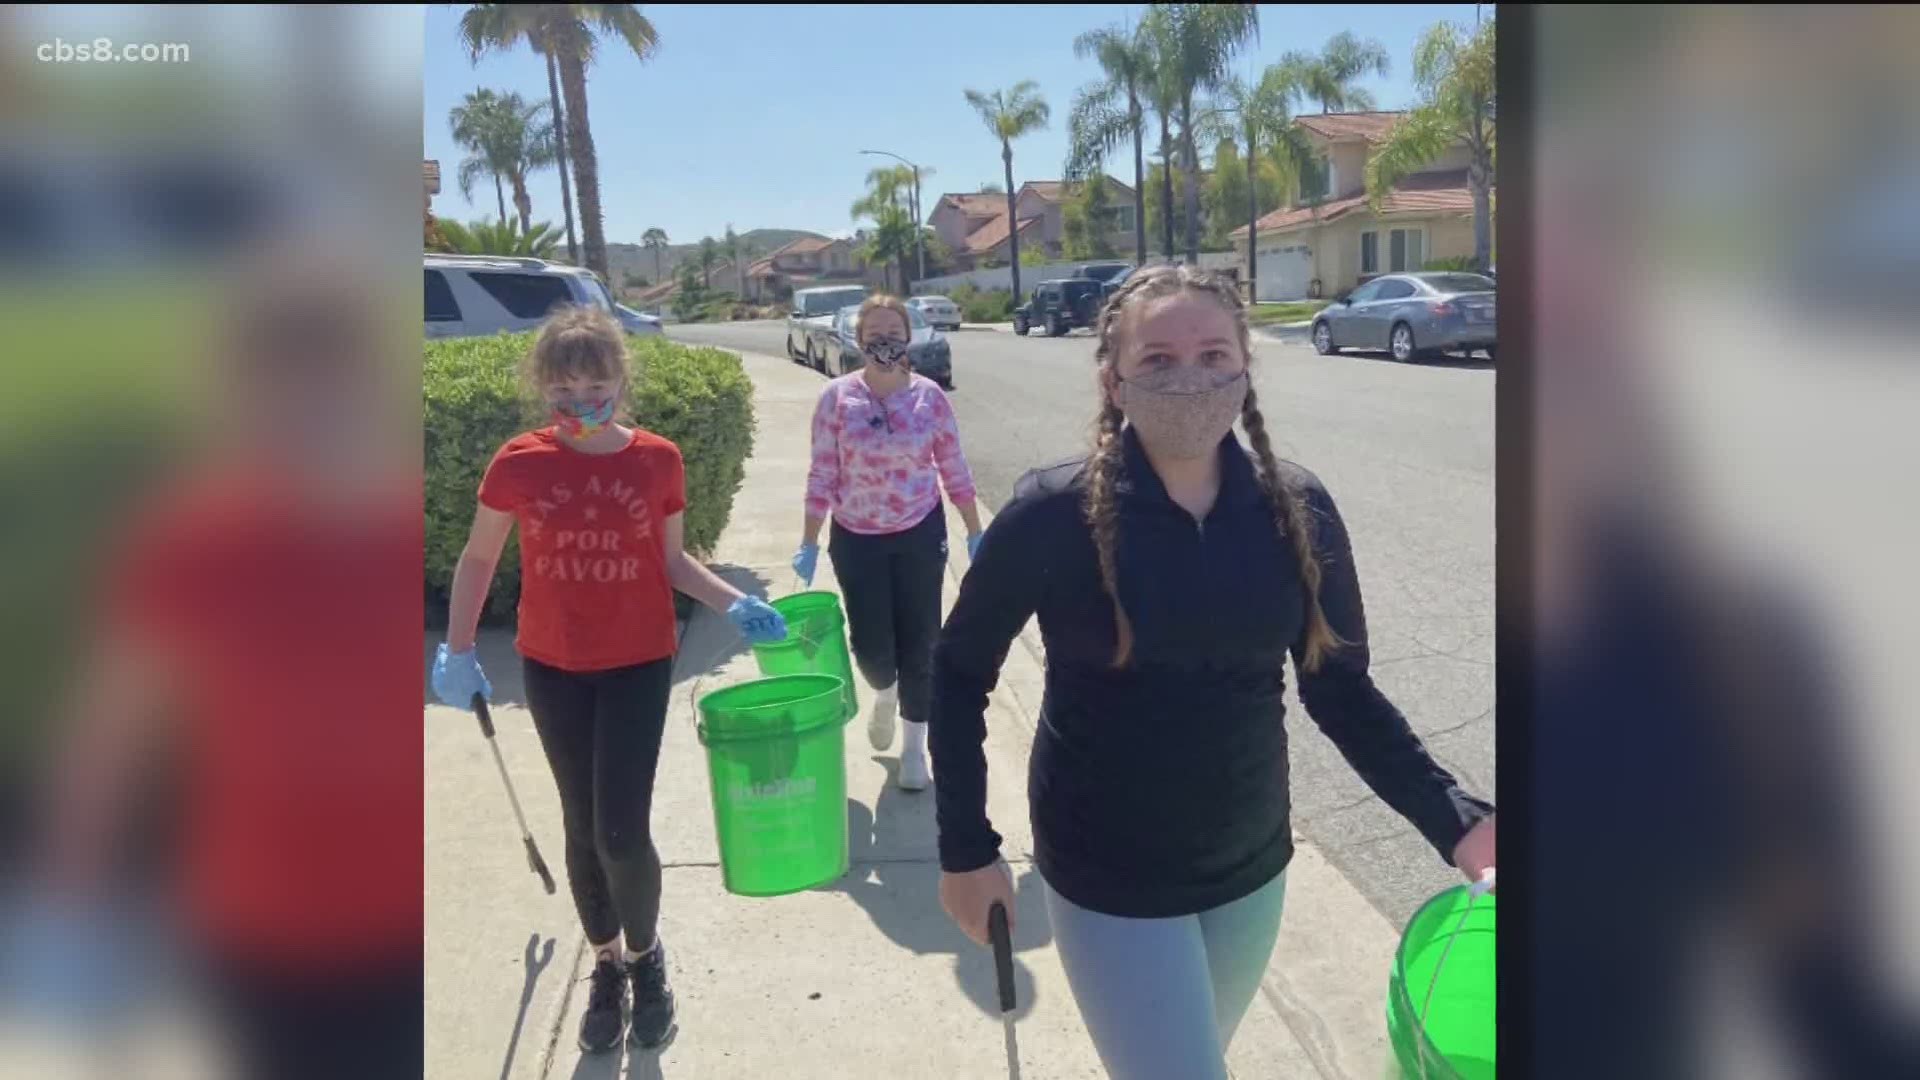 On Sept. 26, San Diegans can take part in the International Coastal Cleanup Day by picking up trash in your community. Volunteers can register at CleanupDay.org.